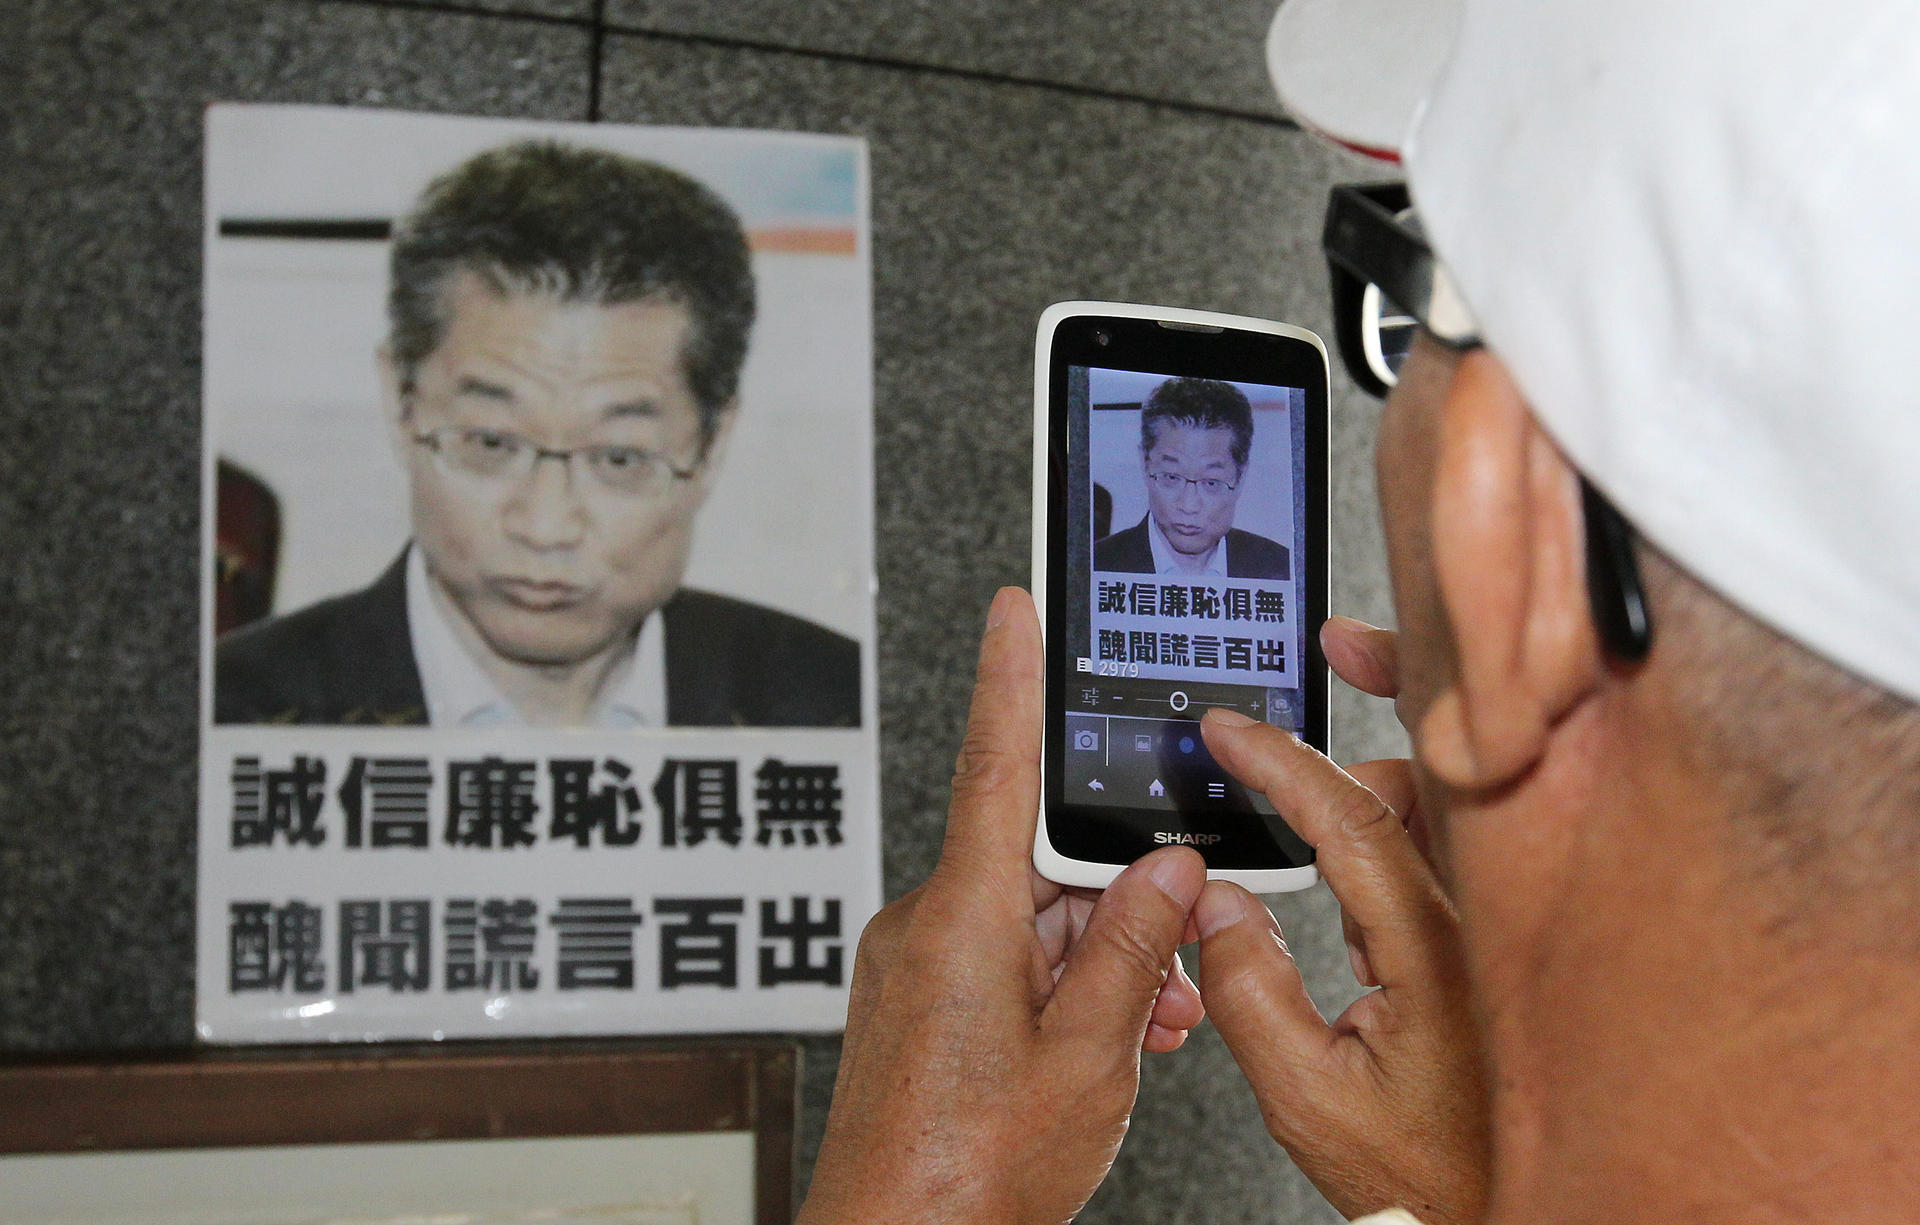 A poster denounces development minister Paul Chan Mo-po over his political scandals. Photo: Dickson Lee